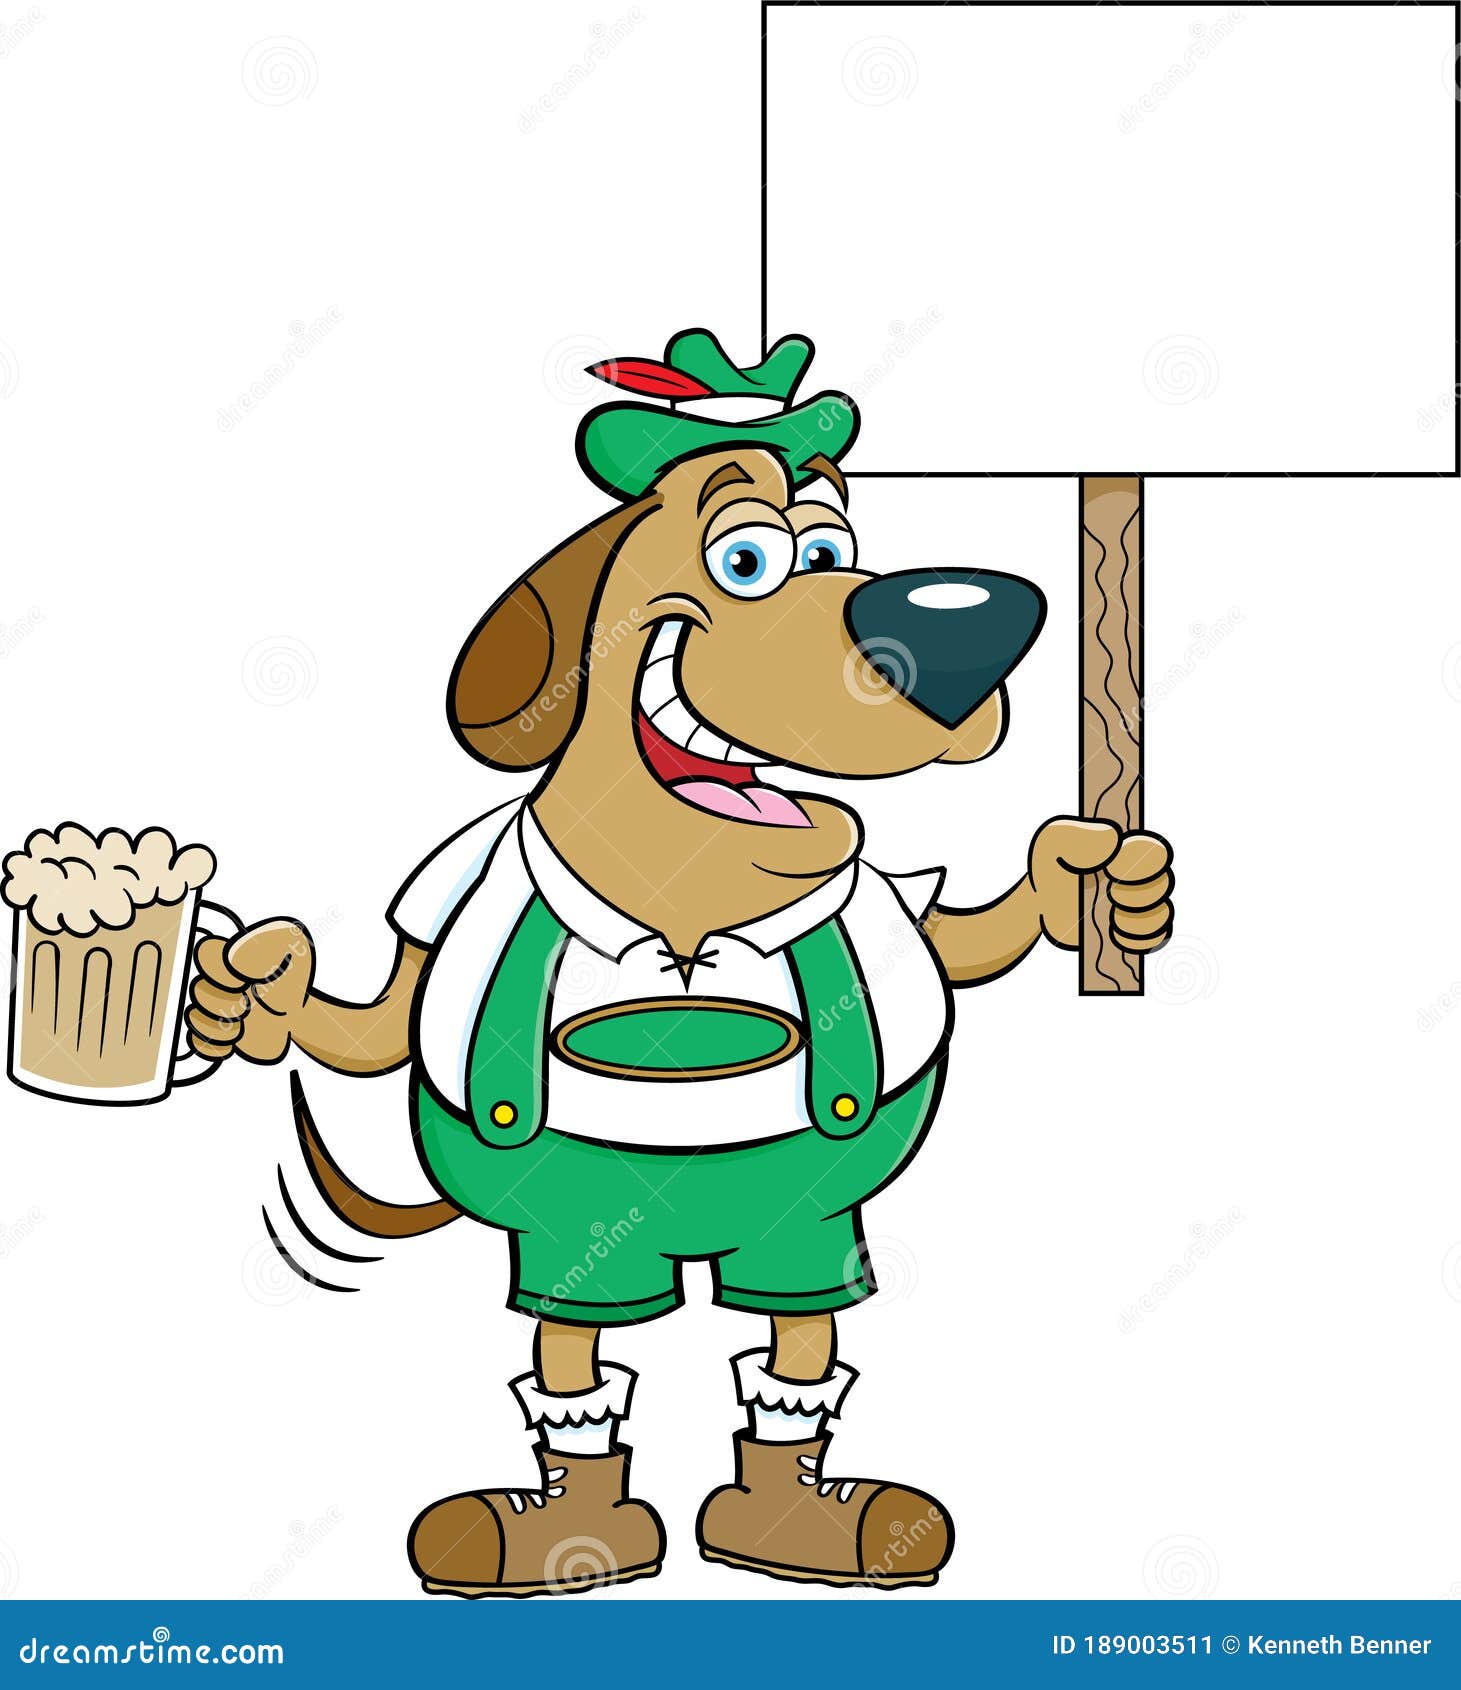 cartoon dog in lederhosen holding a beer and a sign.